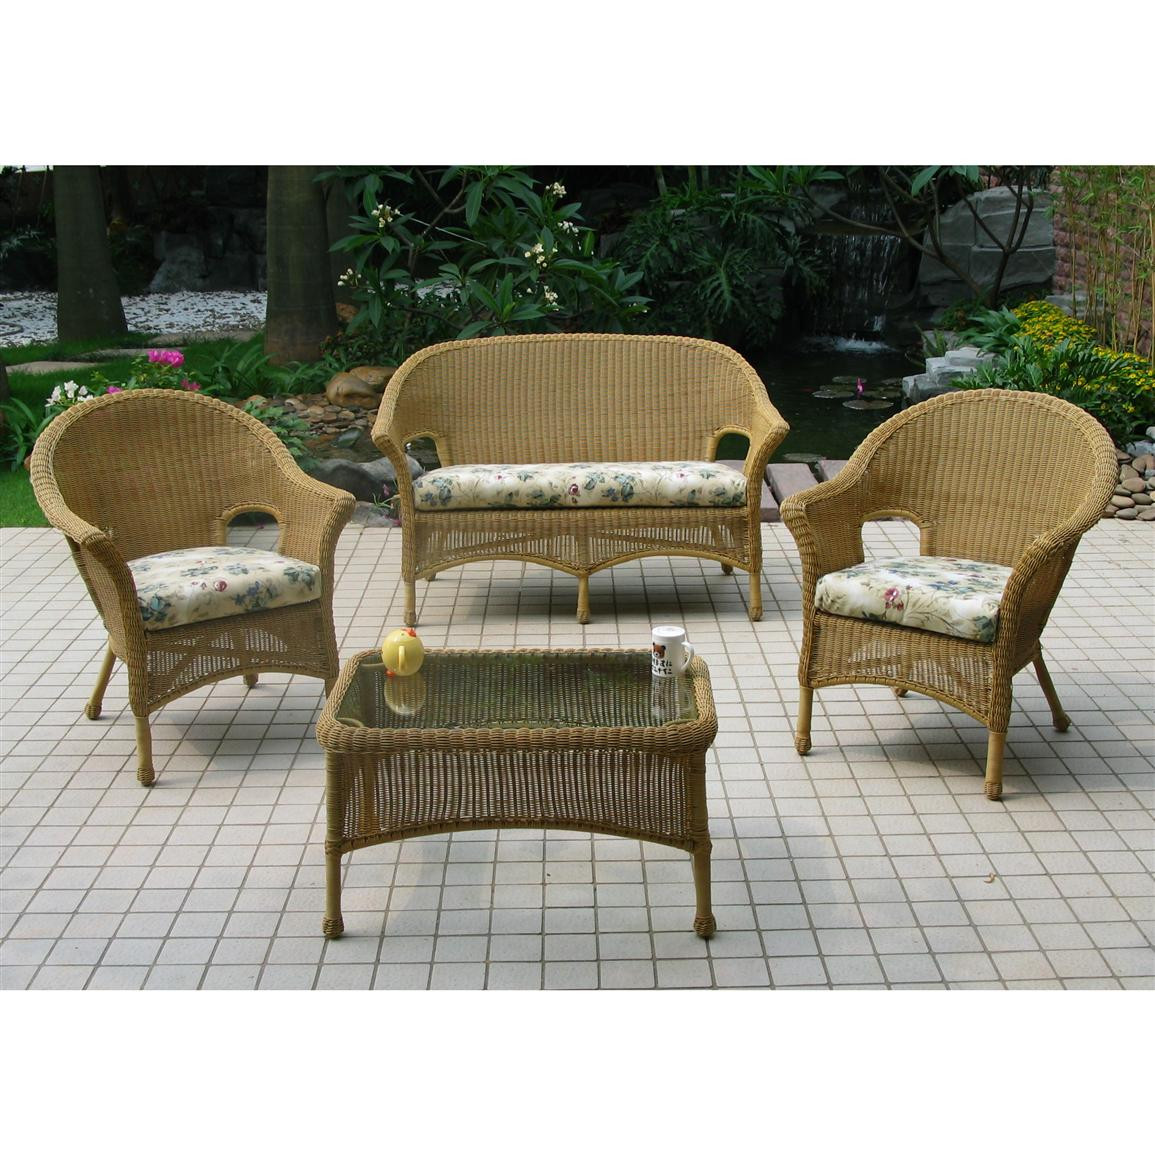 Best ideas about Wicker Patio Furniture
. Save or Pin Chicago Wicker 4 Pc Darby Wicker Patio Furniture Now.